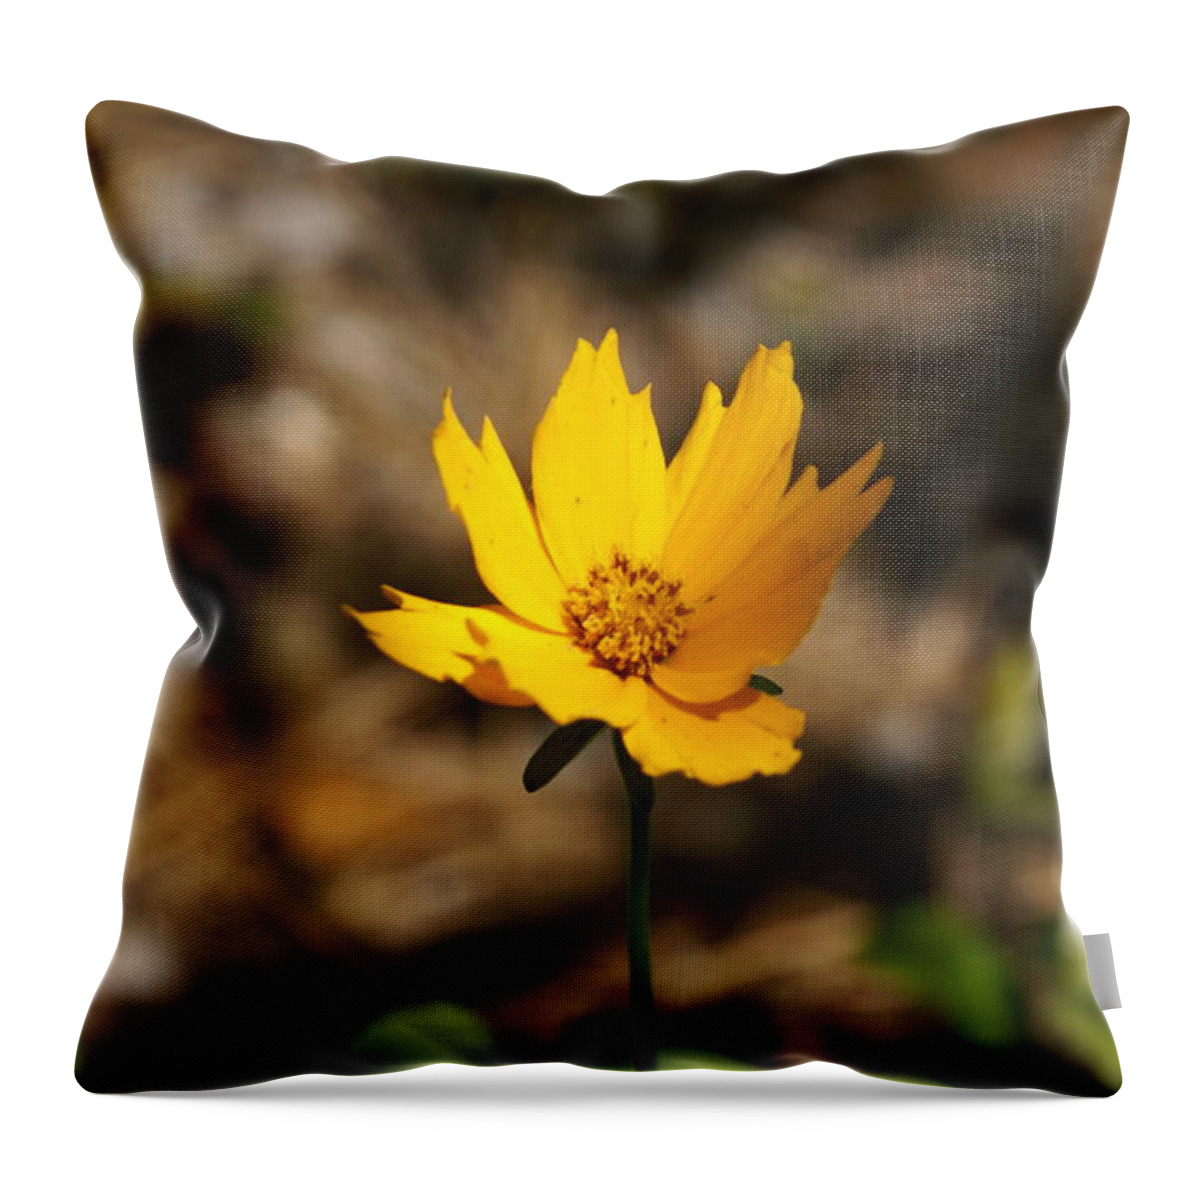  Throw Pillow featuring the photograph Tiny Bloom by Heather E Harman